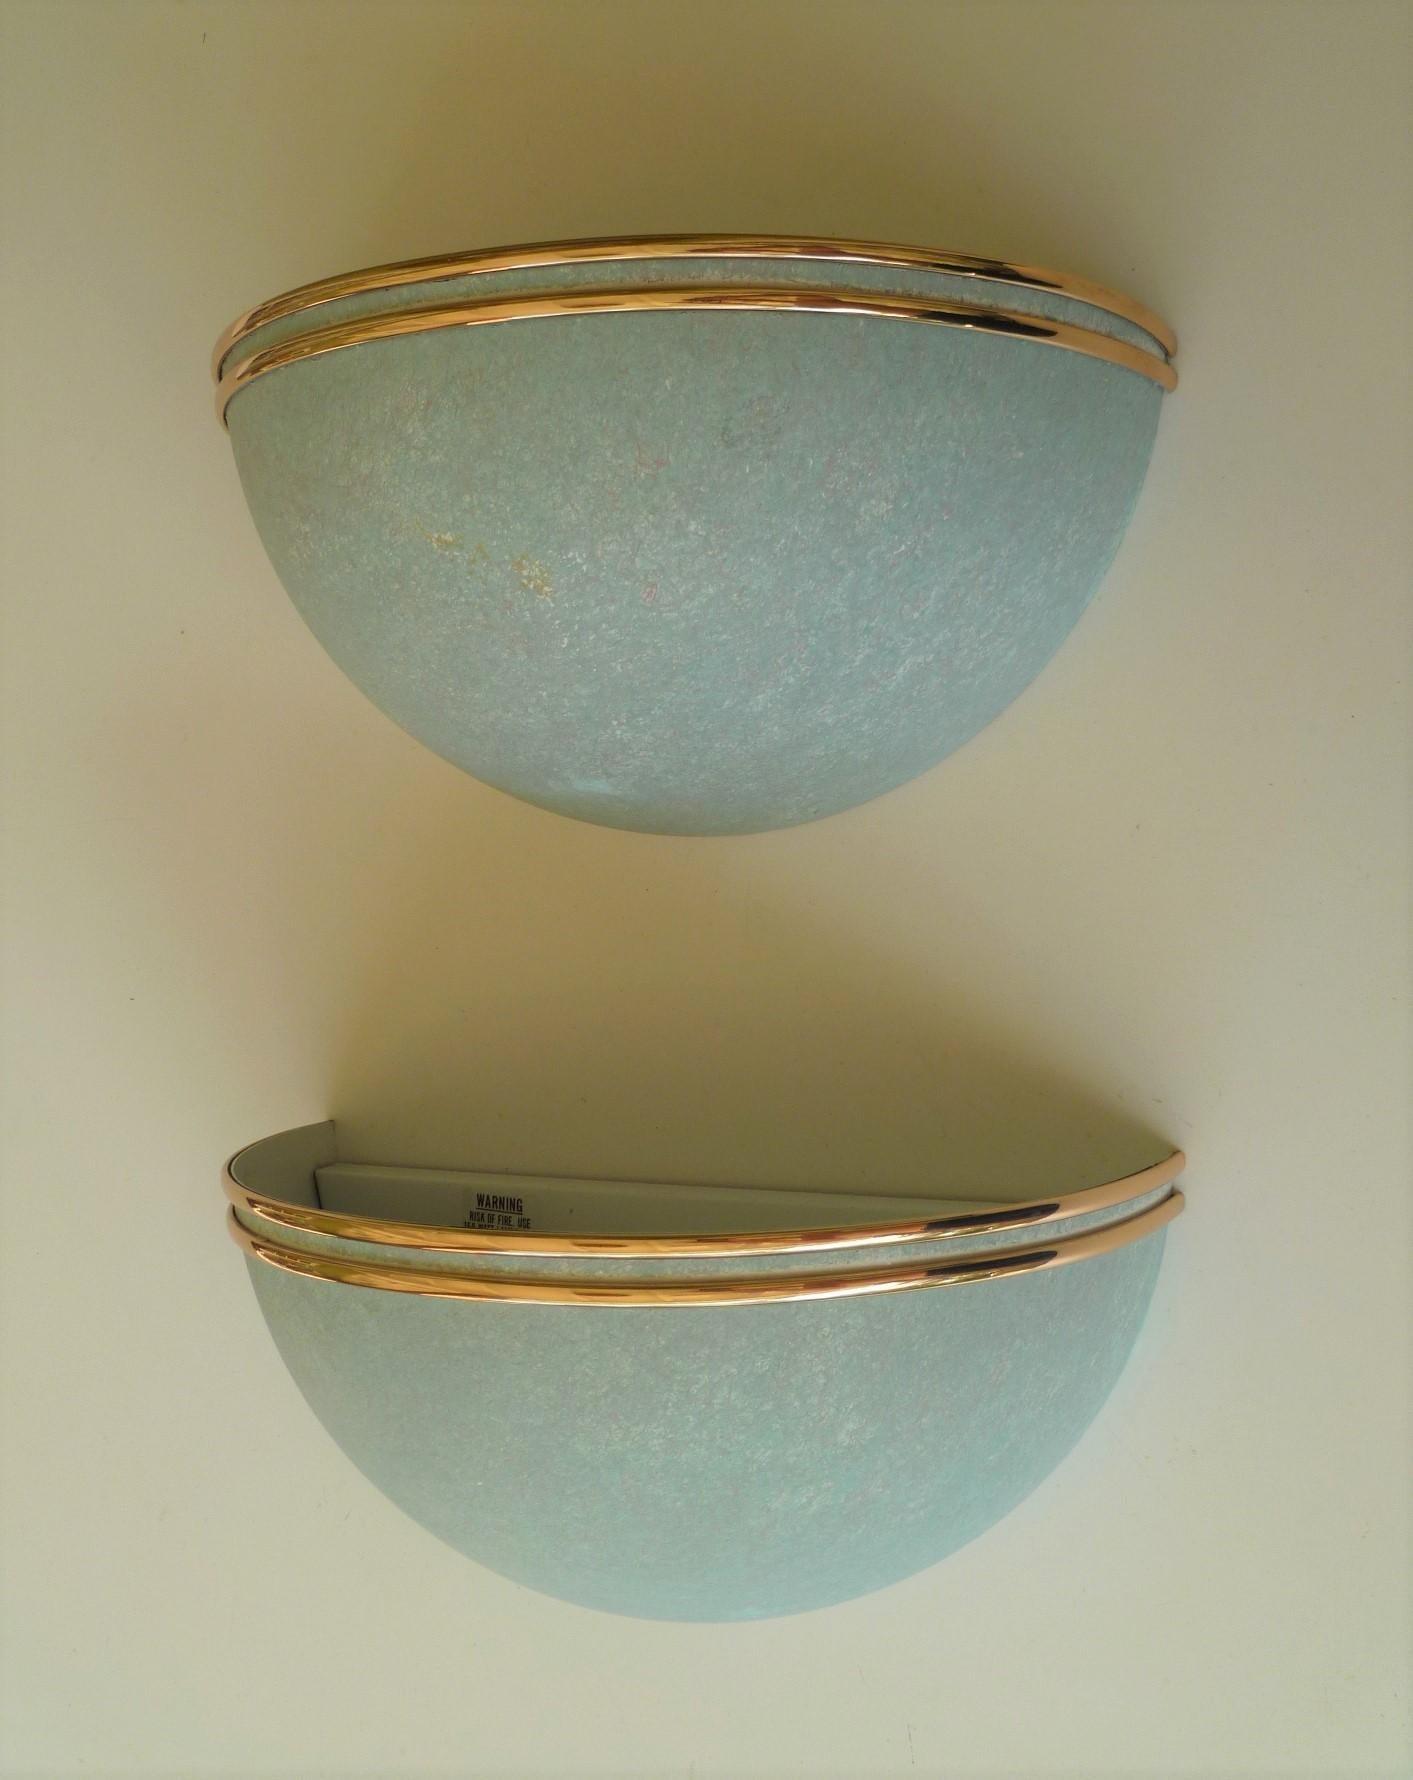 Pair of modern deco metal half moon sconces from the late 1970s, when Modern Art Deco was used in a Miami Vice revival in decoration. Pastel colors were popular and Verdigris was one of the colors of the day and a light textured finish was